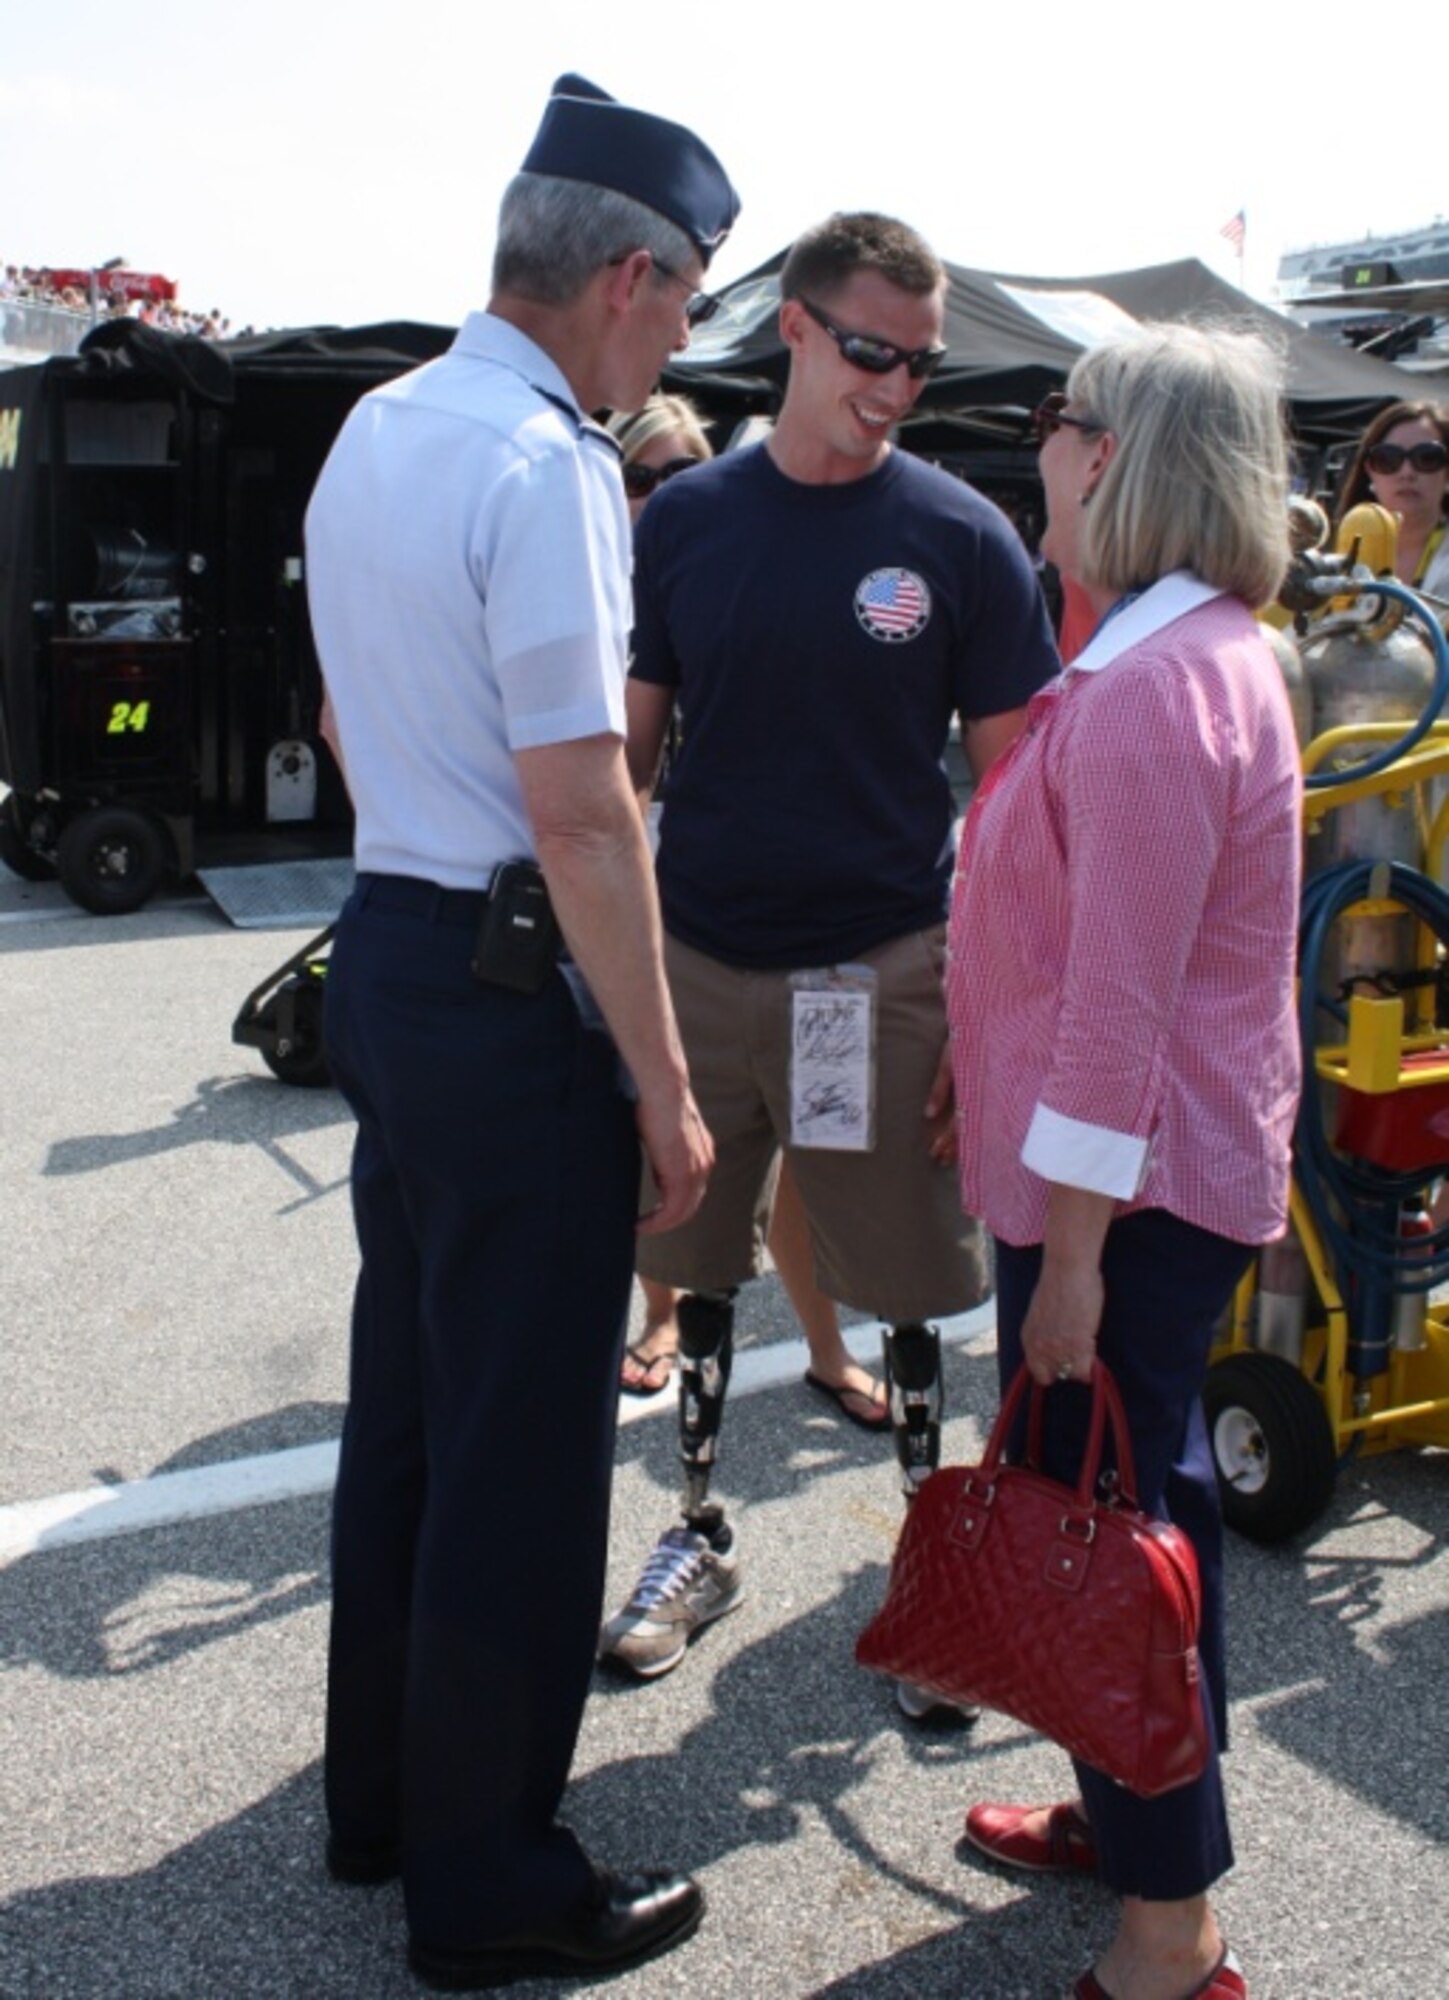 Air Force Chief of Staff Gen. Norton Schwartz and his wife Suzie speak with a Wounded Warrior who was honored July 2, 2011, at the Coke Zero 400 in Daytona Beach, Fla. (U.S. Air Force photo/Capt. Maggie M. Silva)